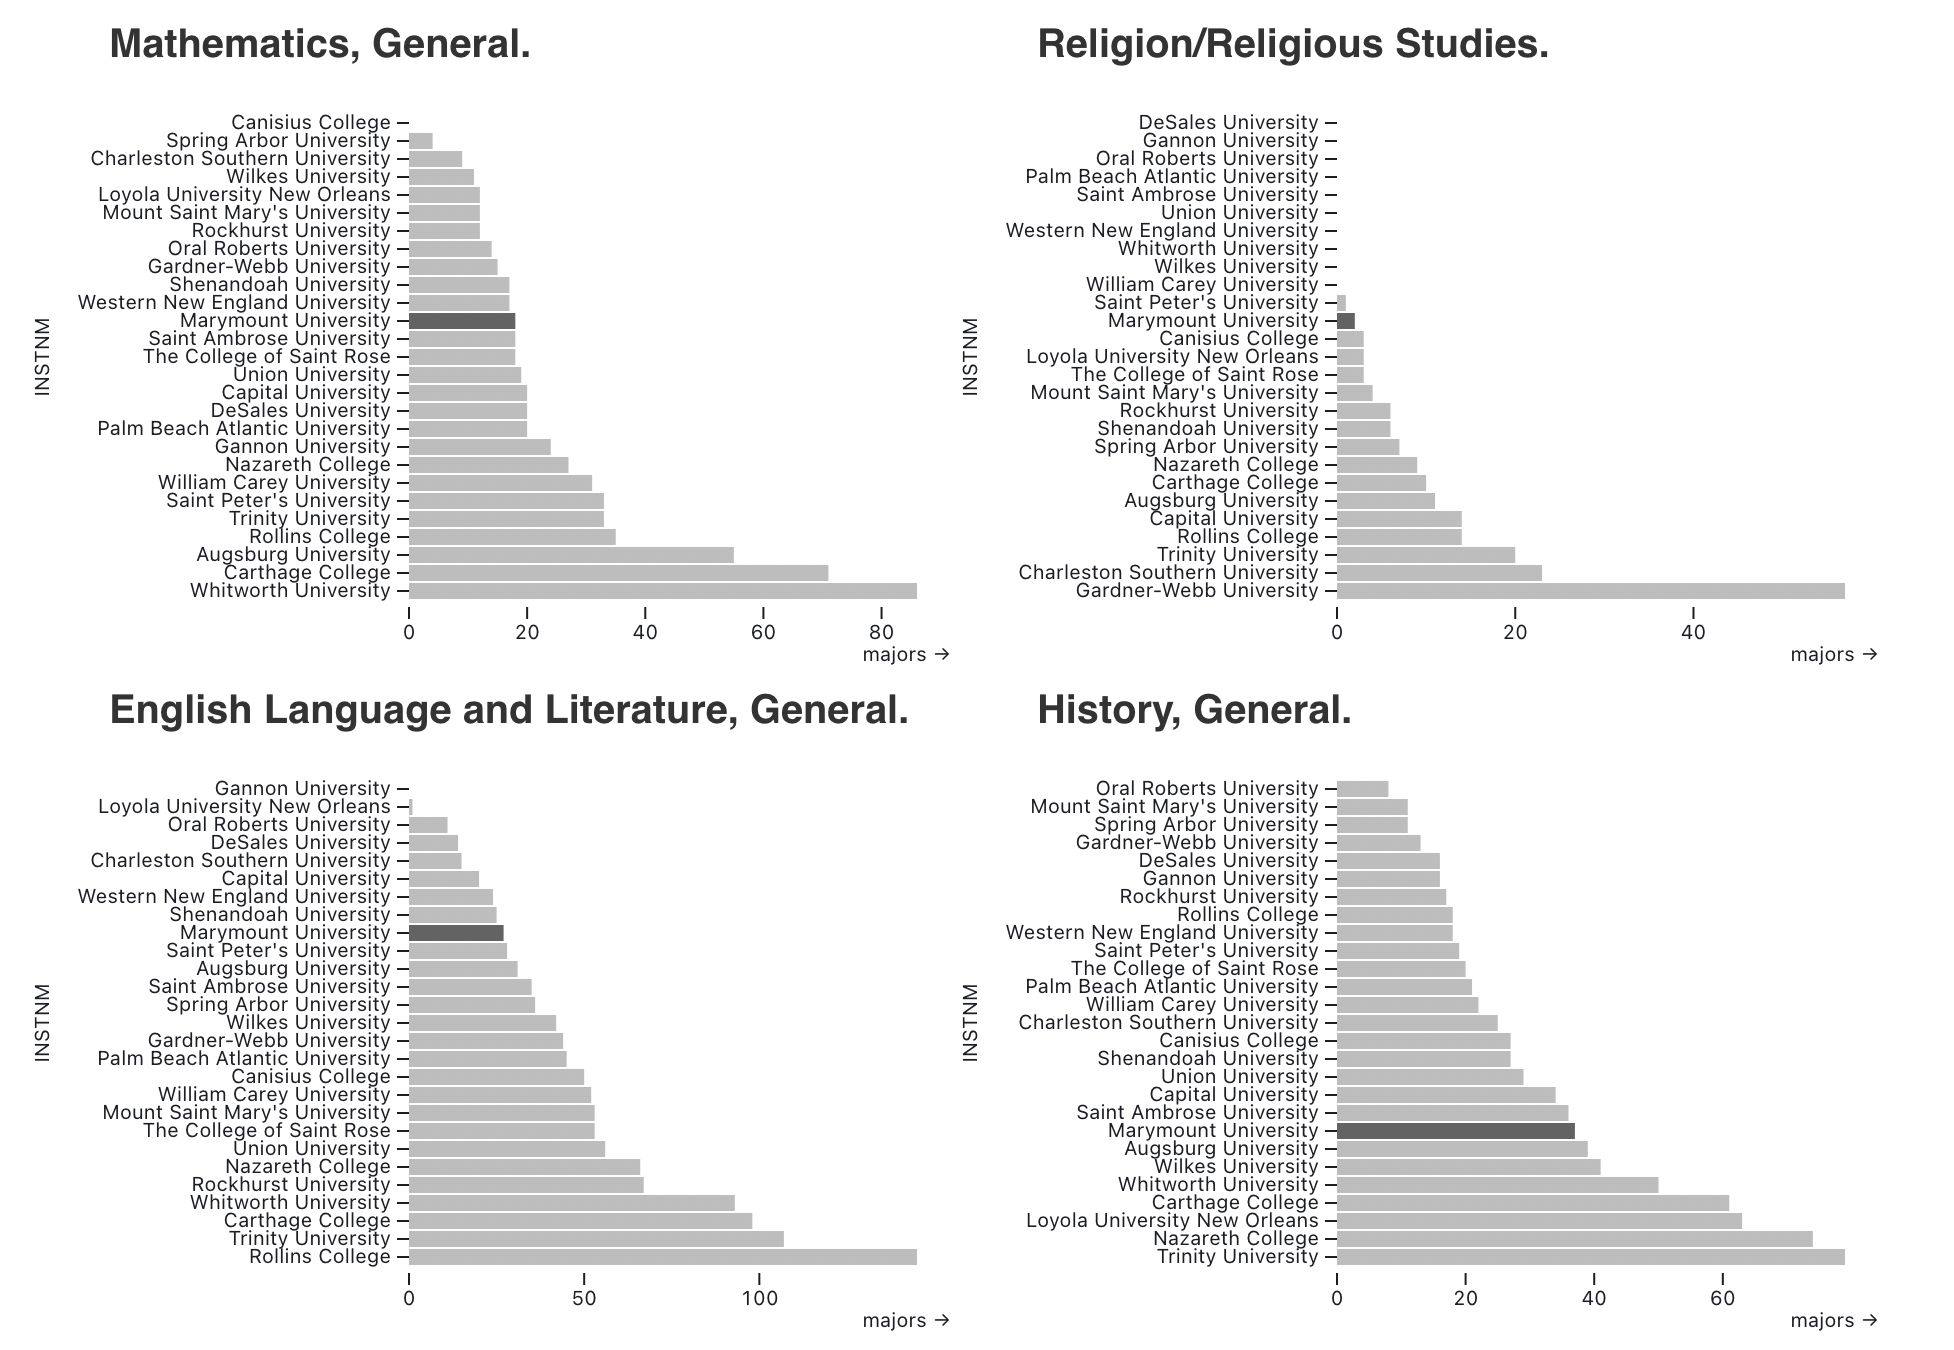 Math, Religion, English, and History degrees.